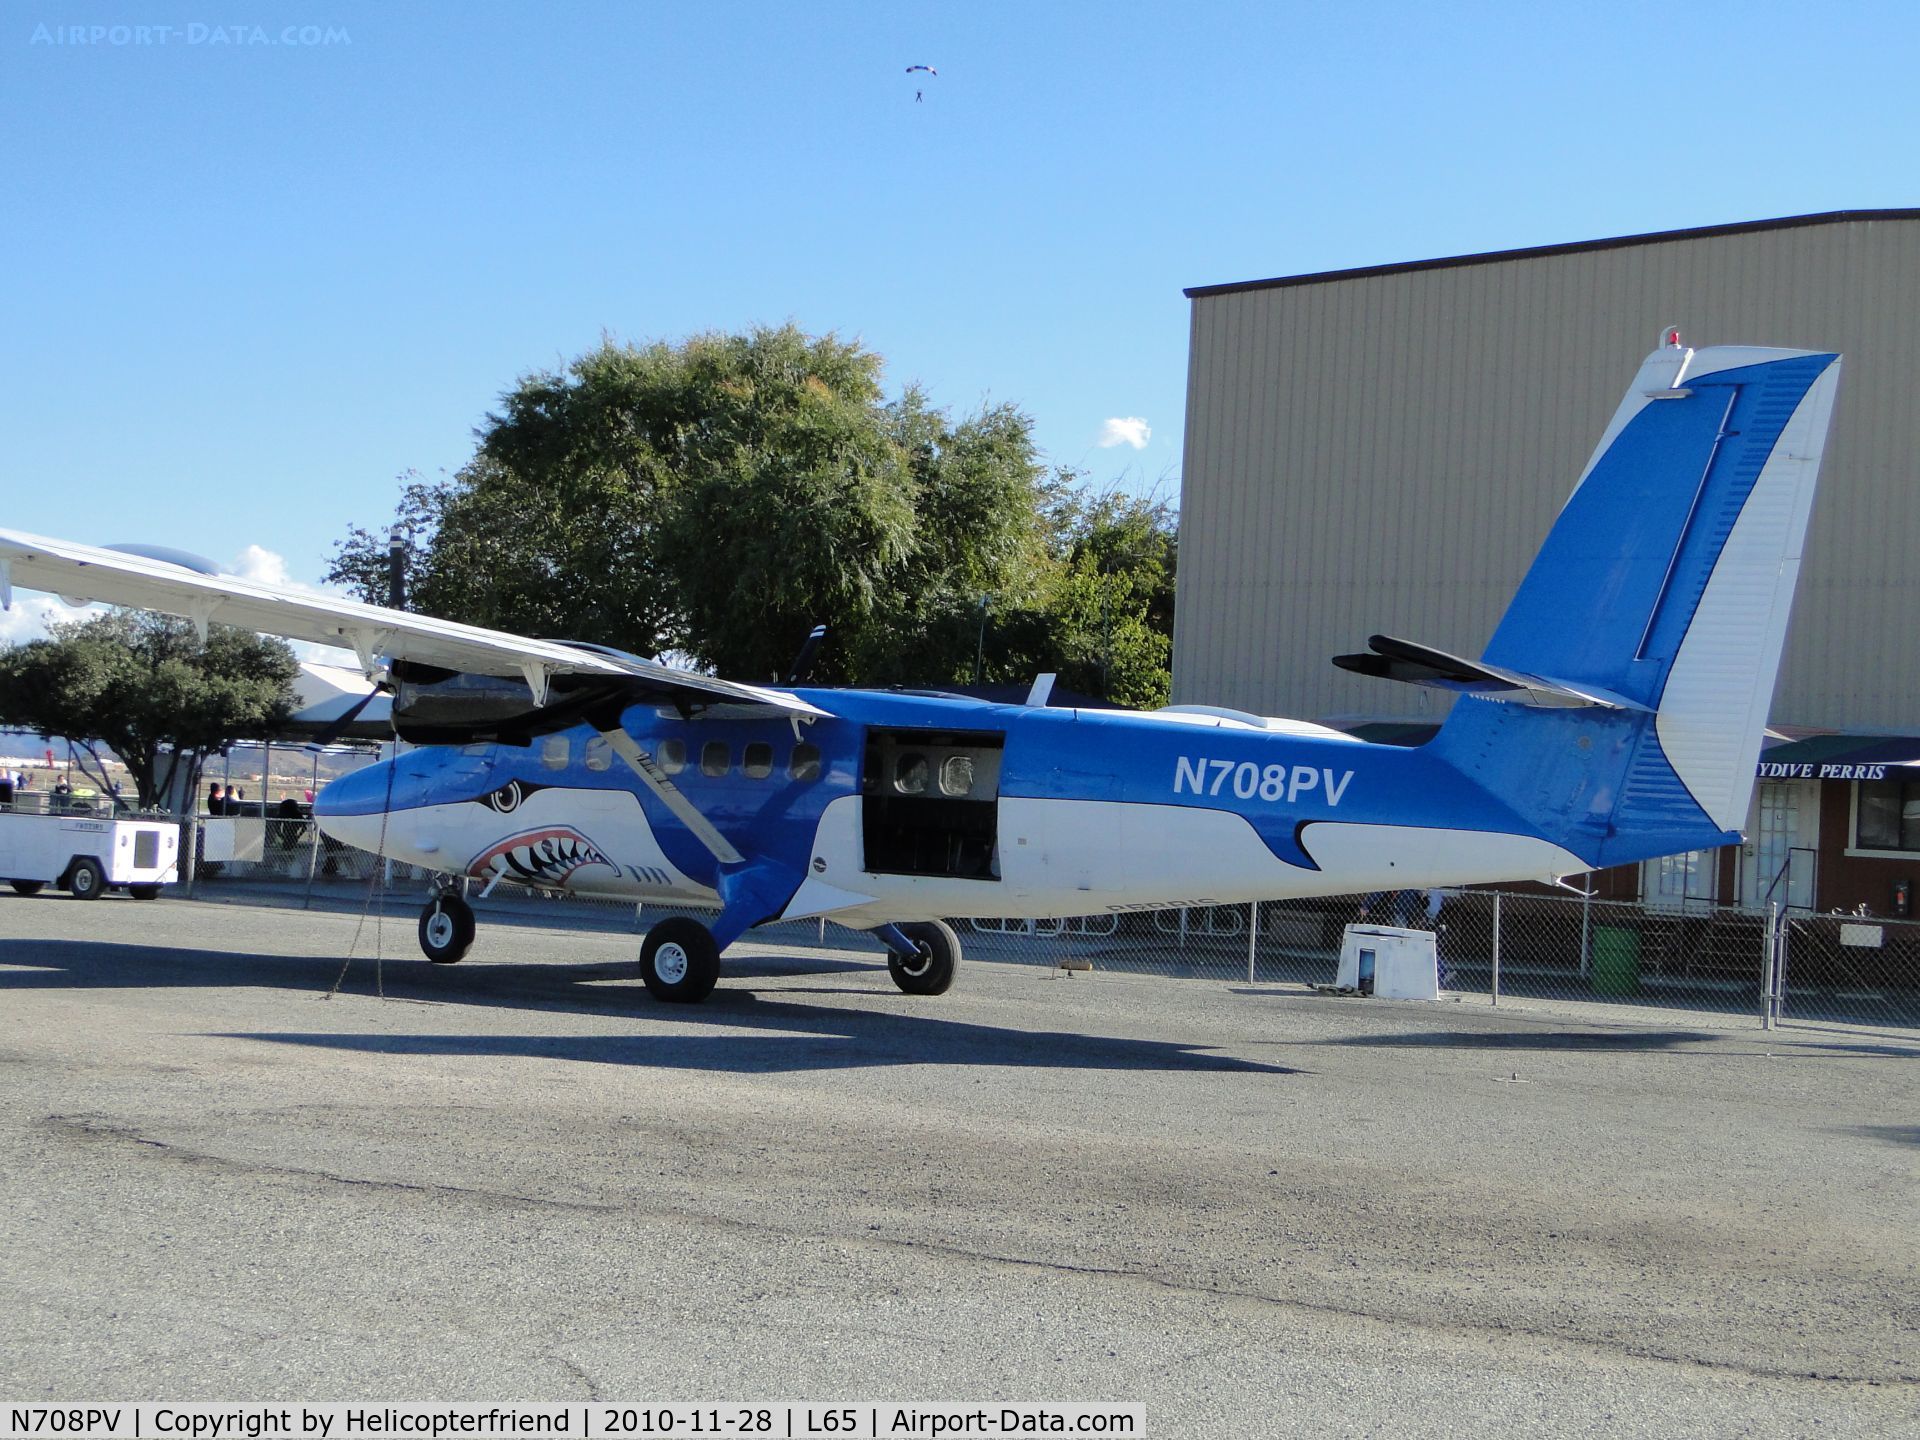 N708PV, 1976 De Havilland Canada DHC-6-300 Twin Otter C/N 489, Tied down and parked near sky diving loading area